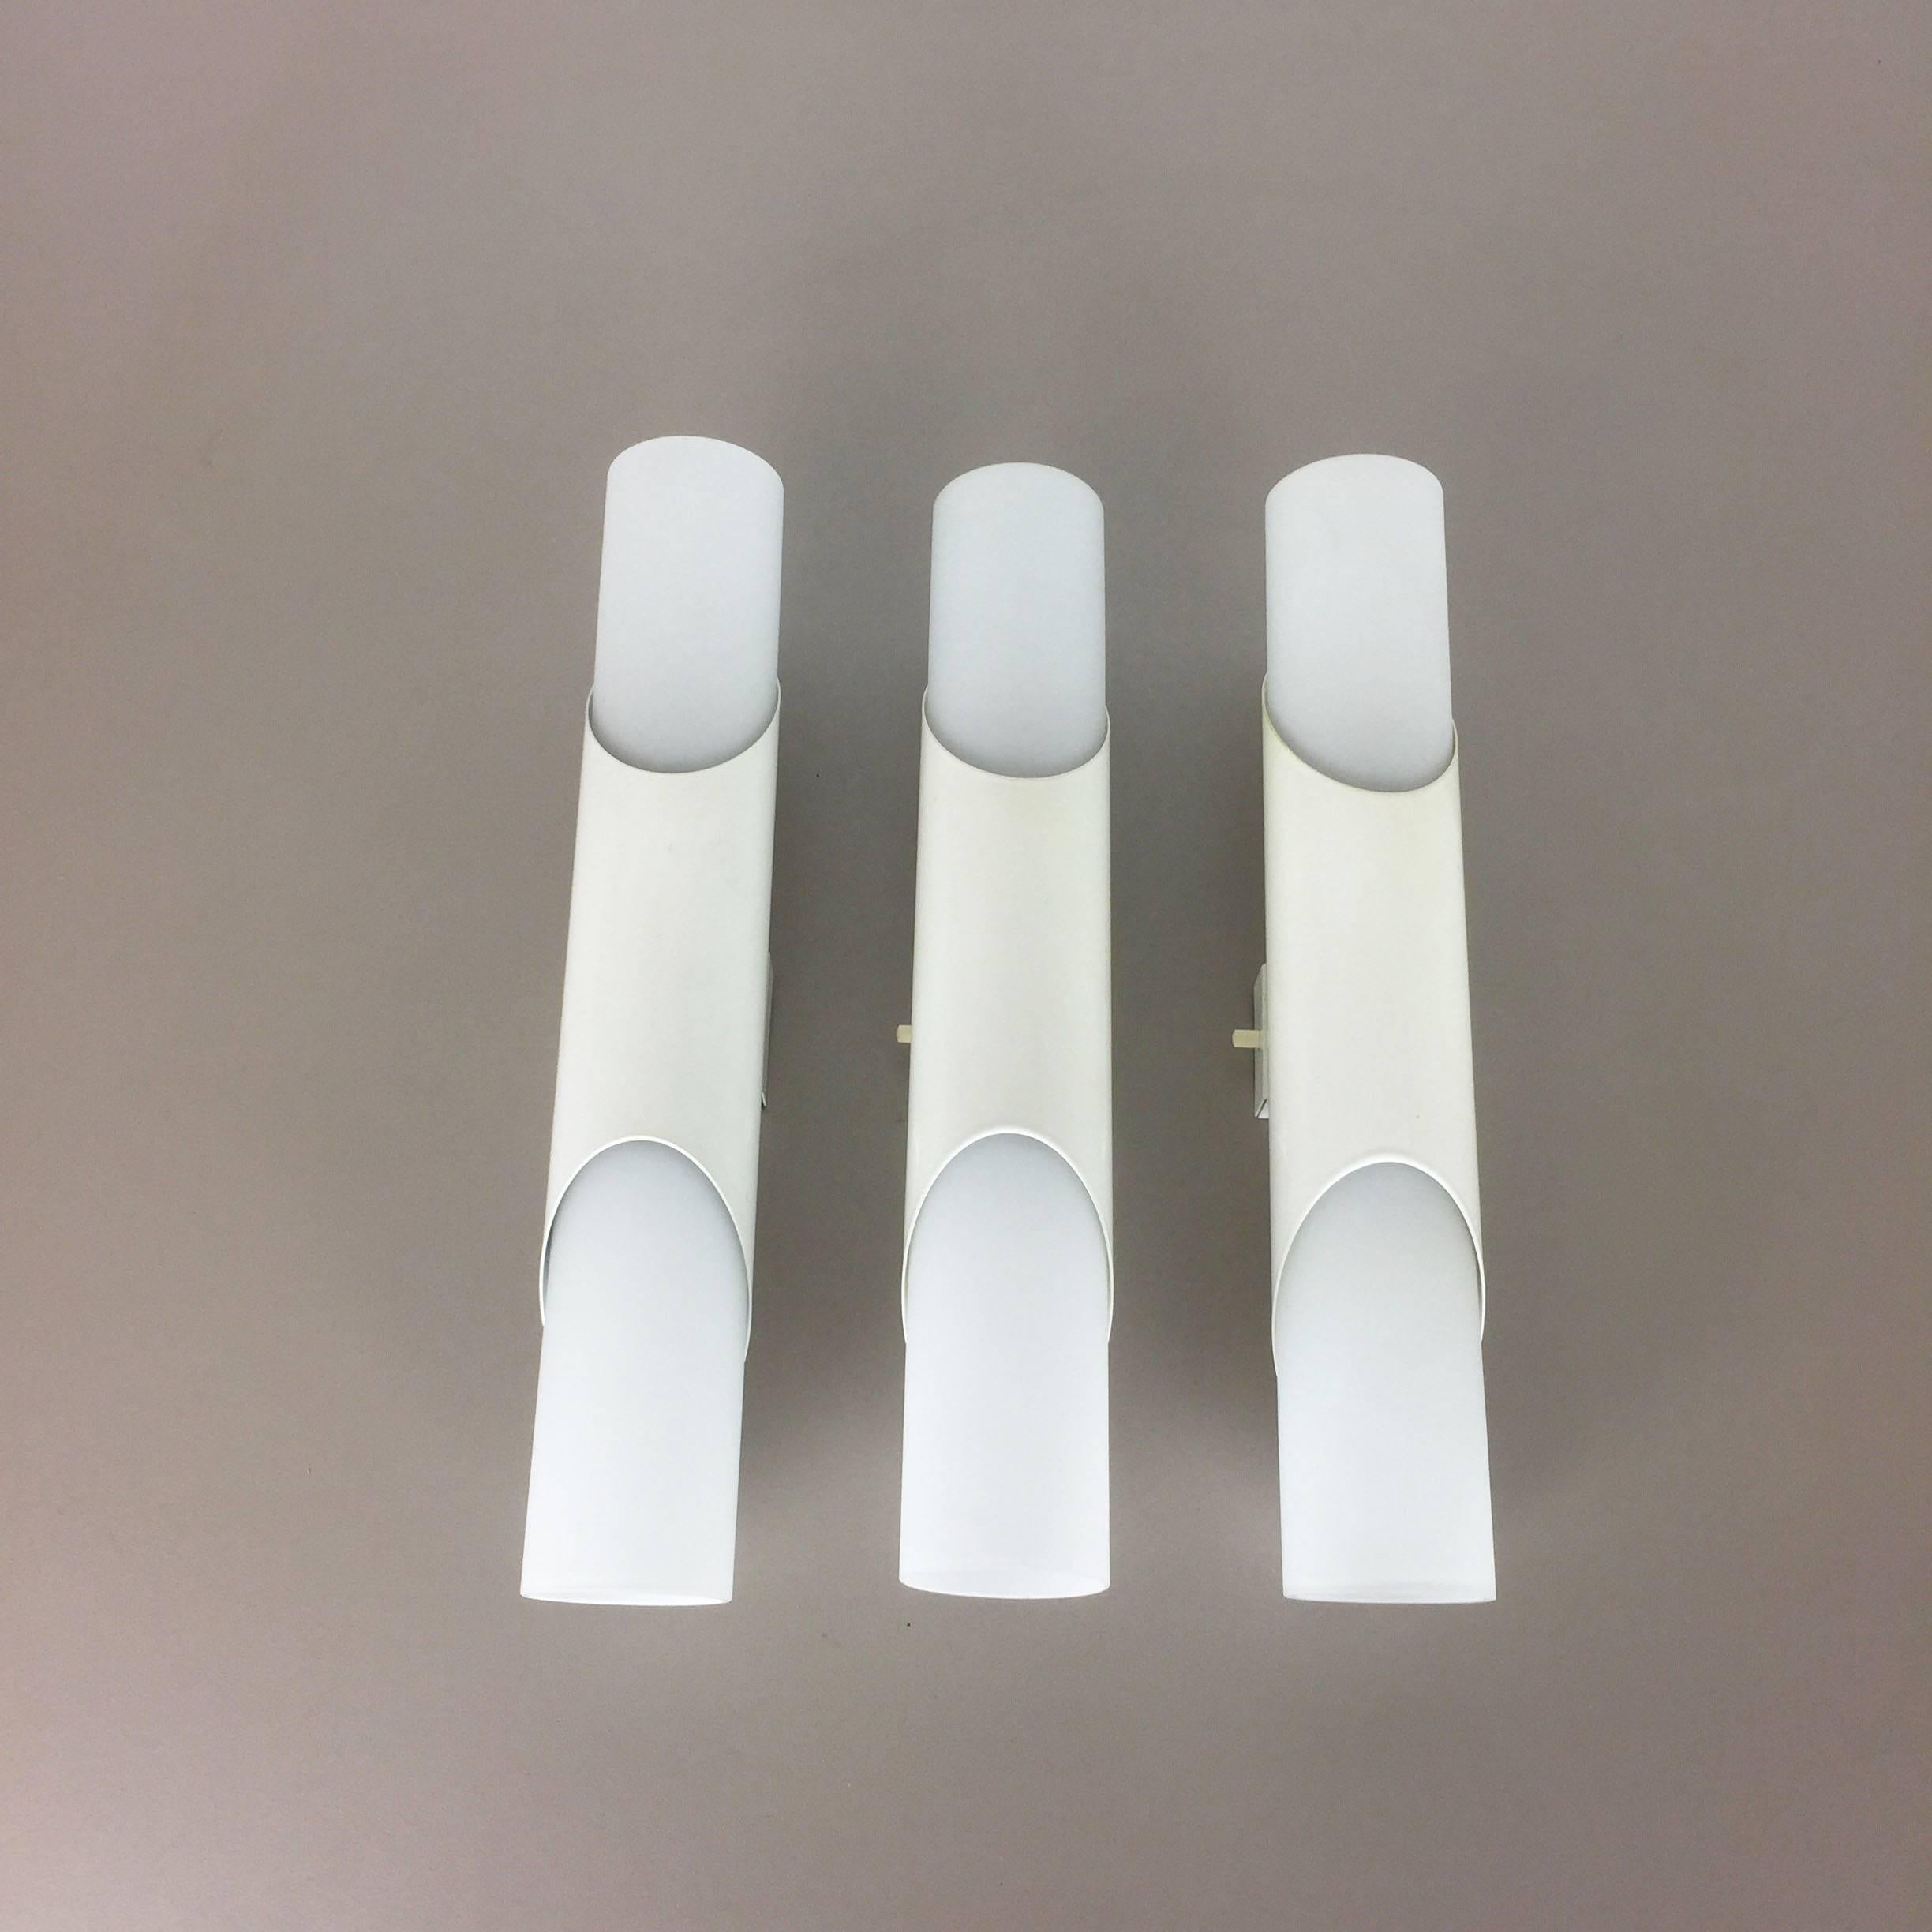 Set of three wall lights with glass tubes.

Origin: Germany, 

1970s.

This set of three original 1970s RAAK style modernist wall lights feature white-lacquered metallic wall plates and frosted glass shade tubes. Each light has a switch and